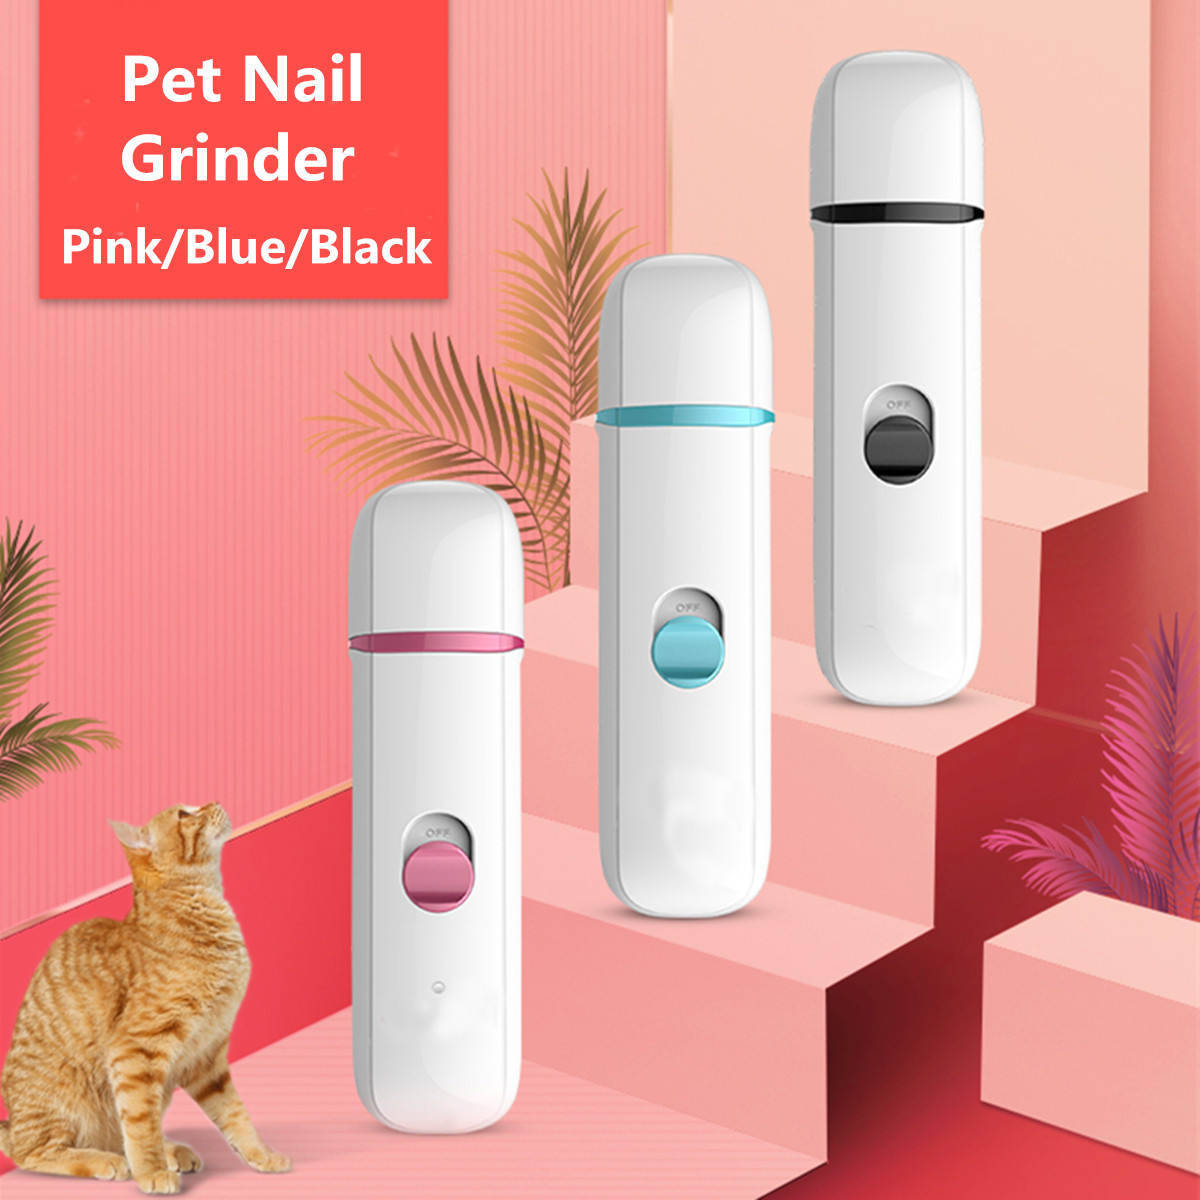 Electric-Dog-Nail-Grinder-Rechargeable-Pet-Nail-File-Portable-Cat-Paw-Trimmer-Nail-Clipper-1249563